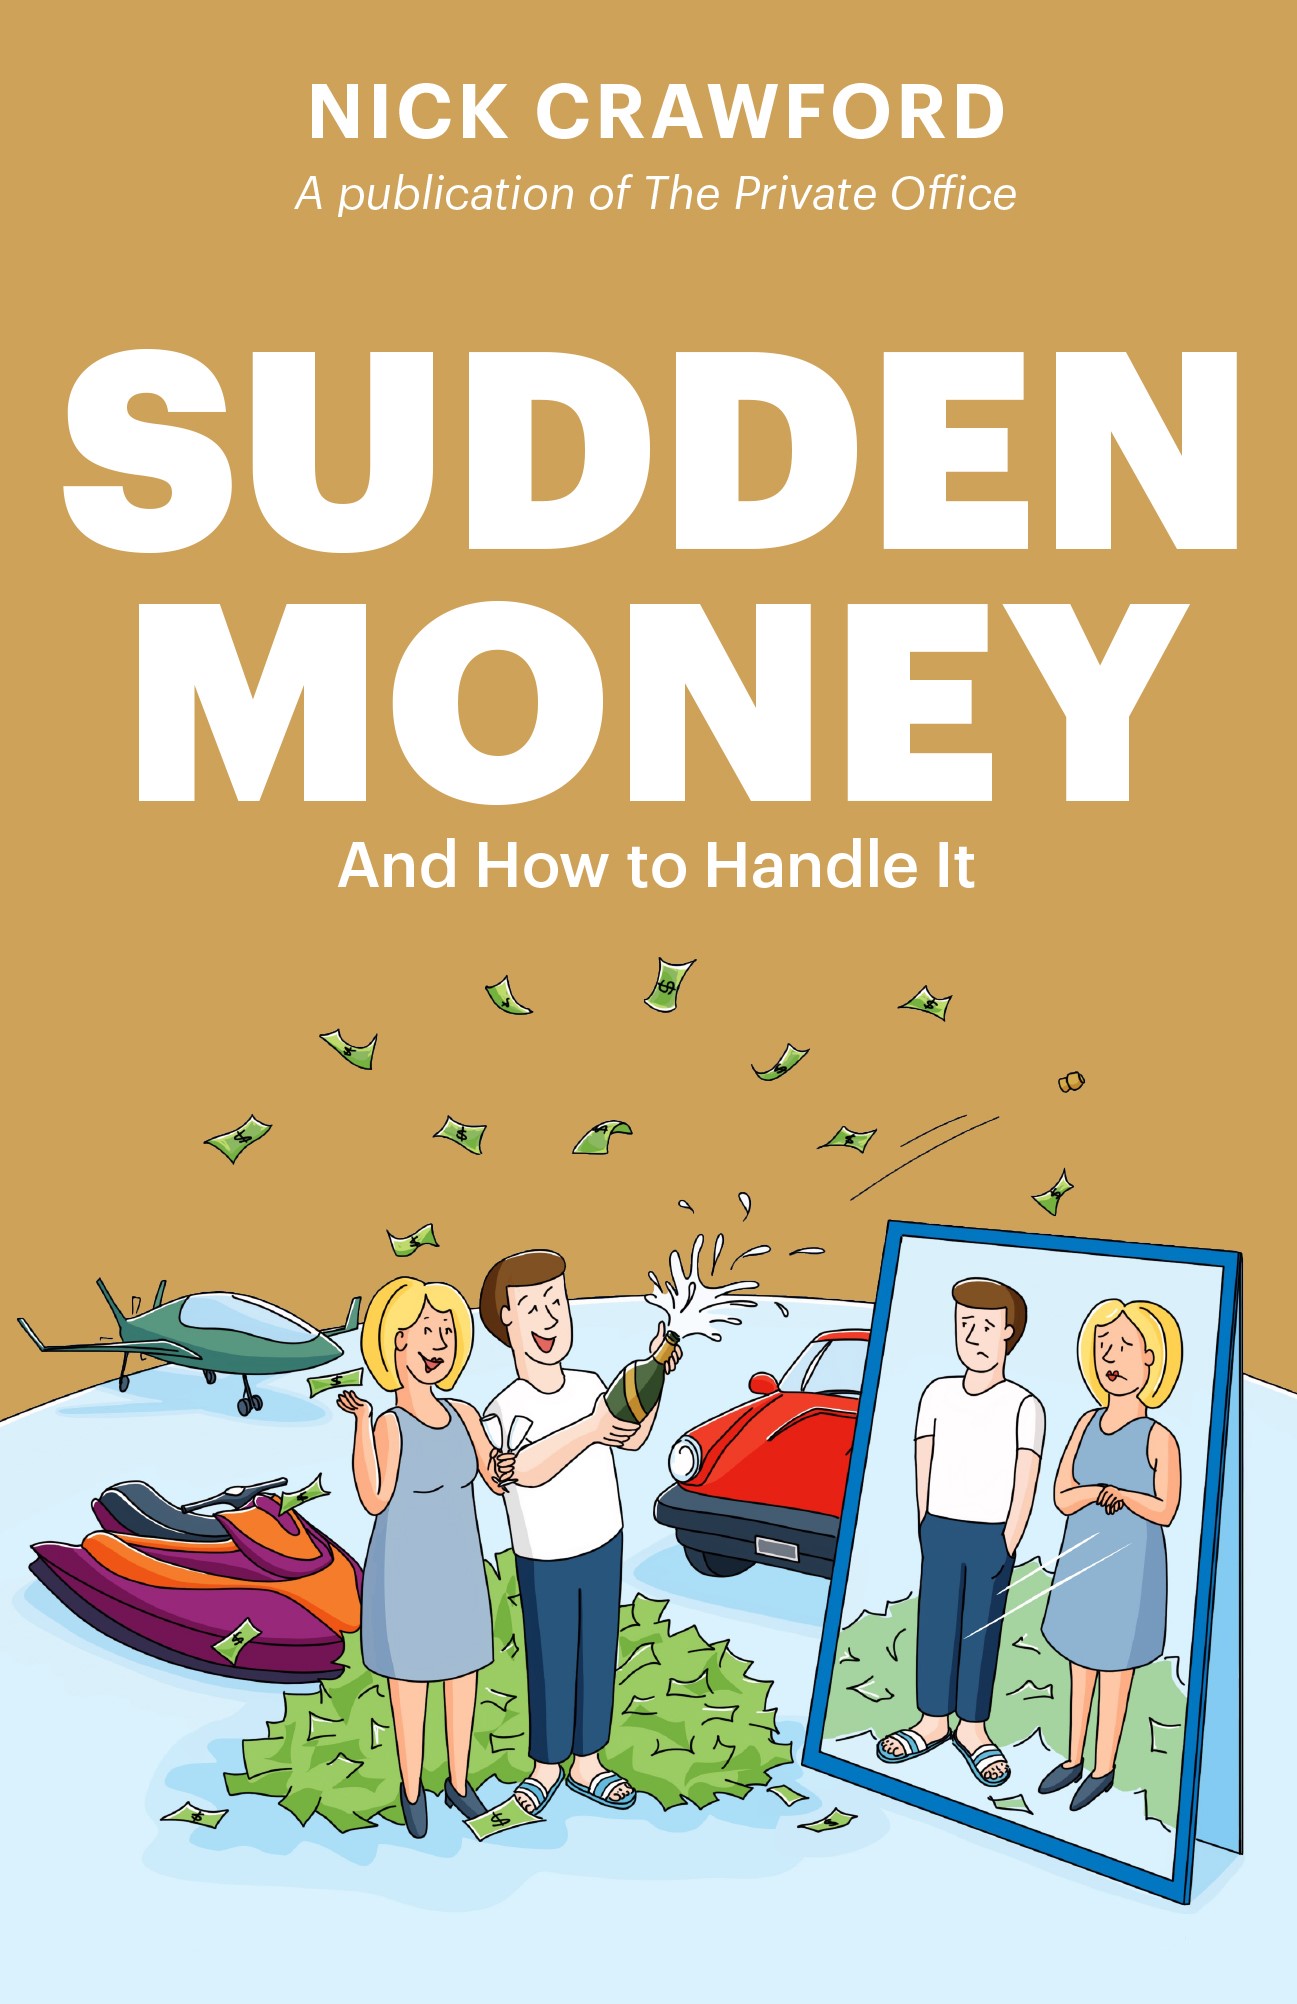 Cover of the book Sudden Money showing two people popping champagne corks with a pile of money behind them whilst looking in a mirror where they appear sad.